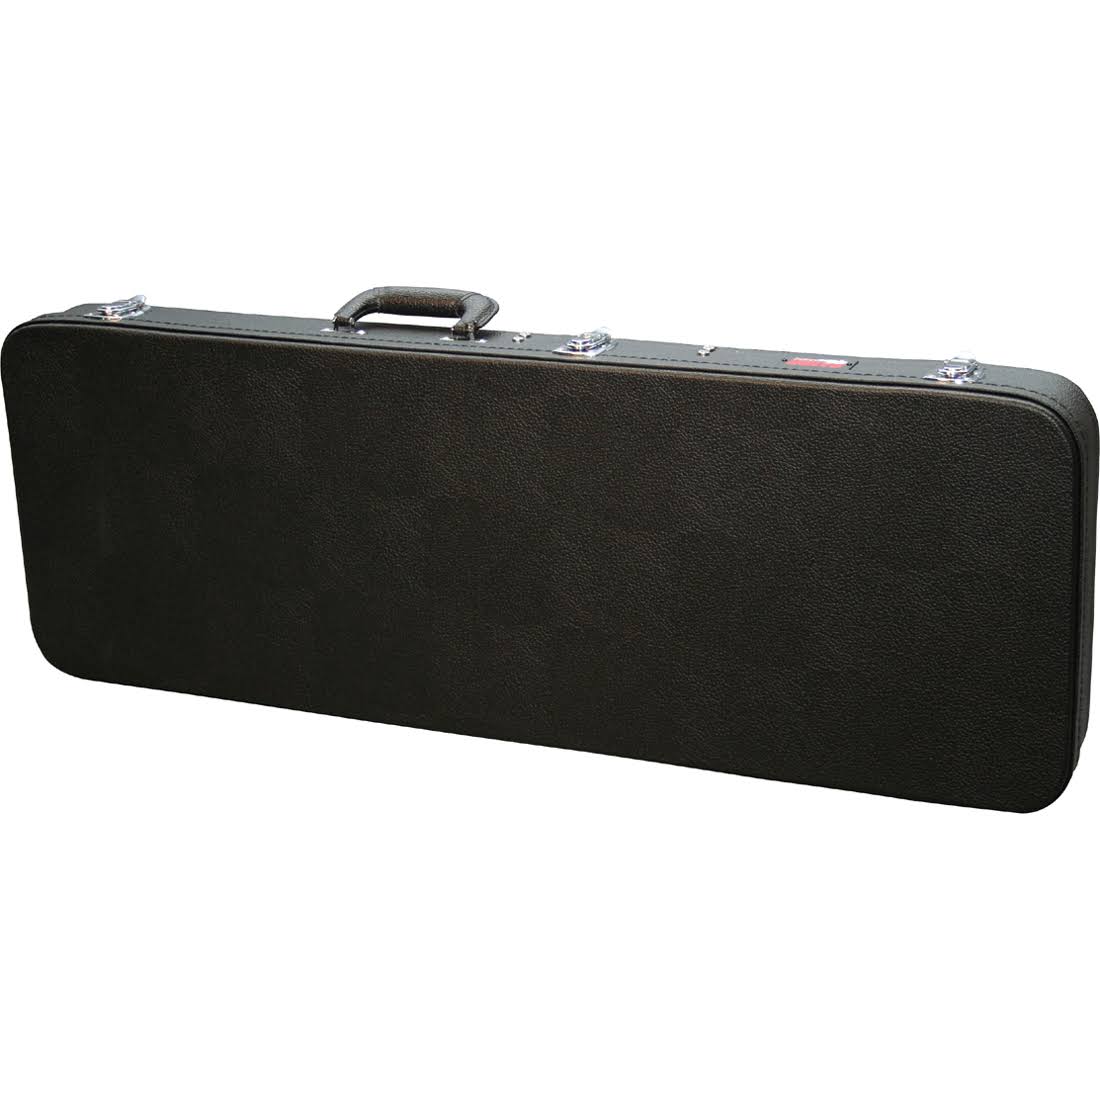 Gator Style and Amp Wide Body Electric Guitar Case